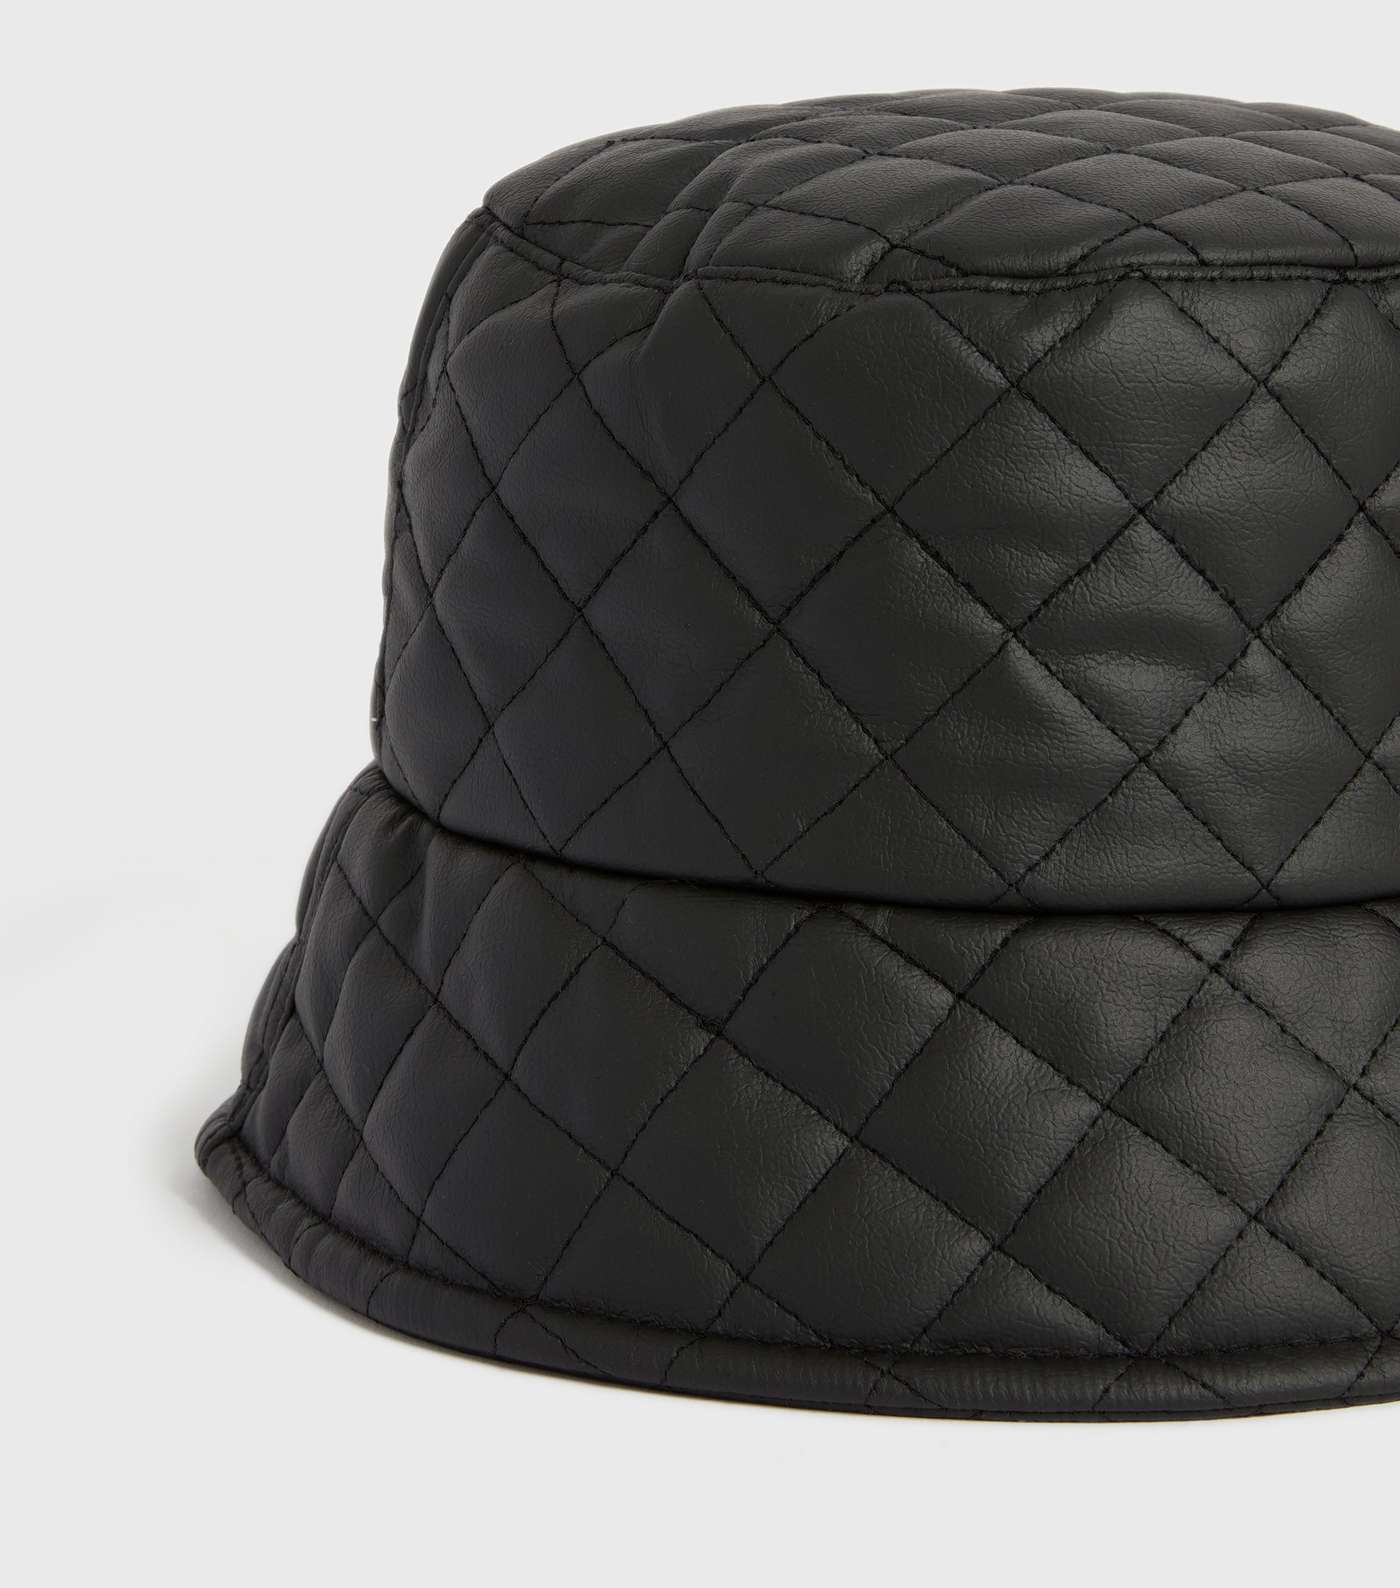 Black Quilted Leather-Look Bucket Hat Image 3